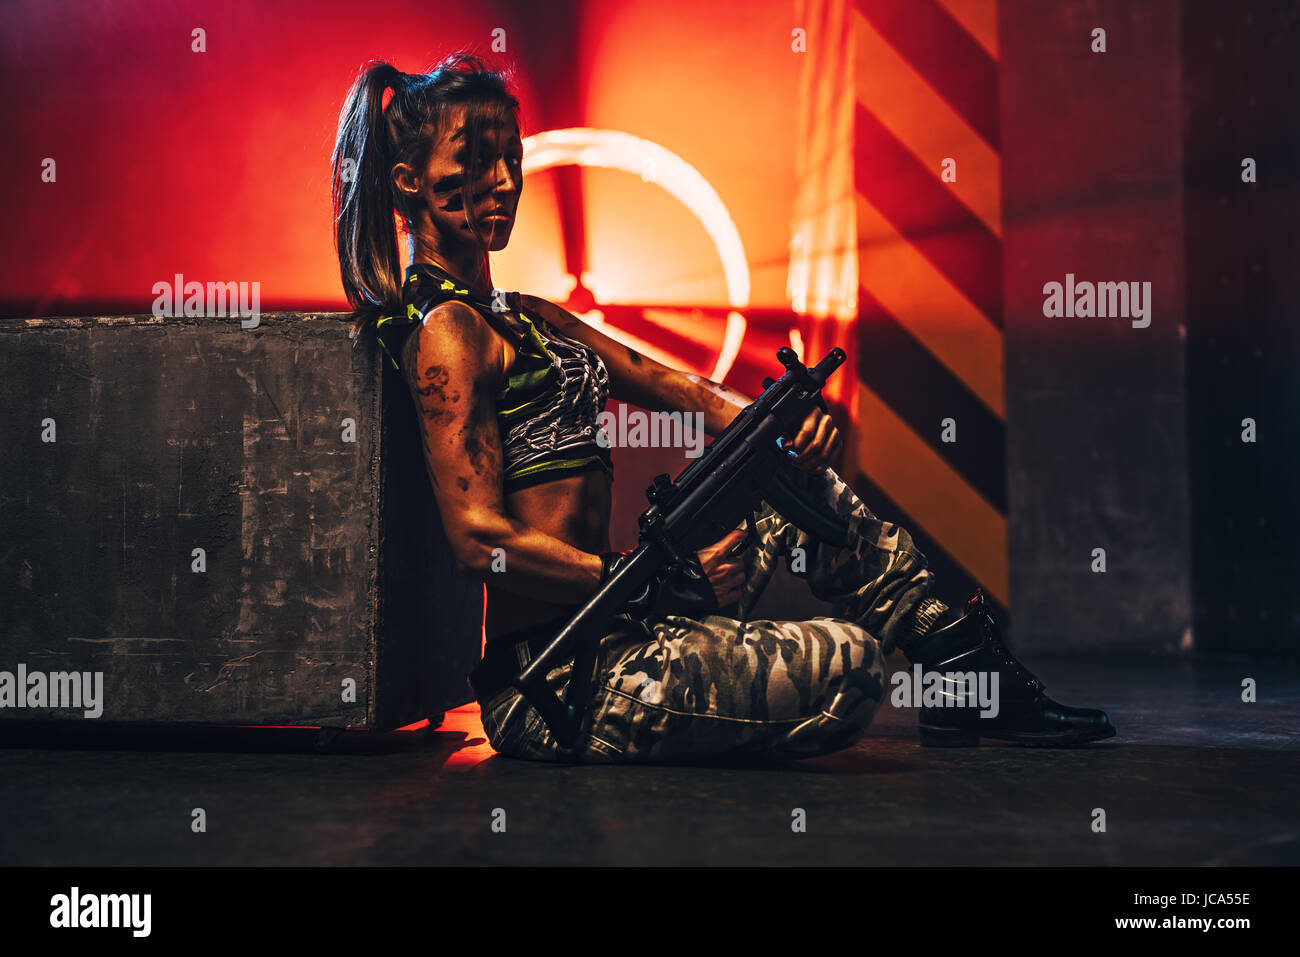 Young strong woman warrior with big gun in dramatic urban interior with red light Stock Photo